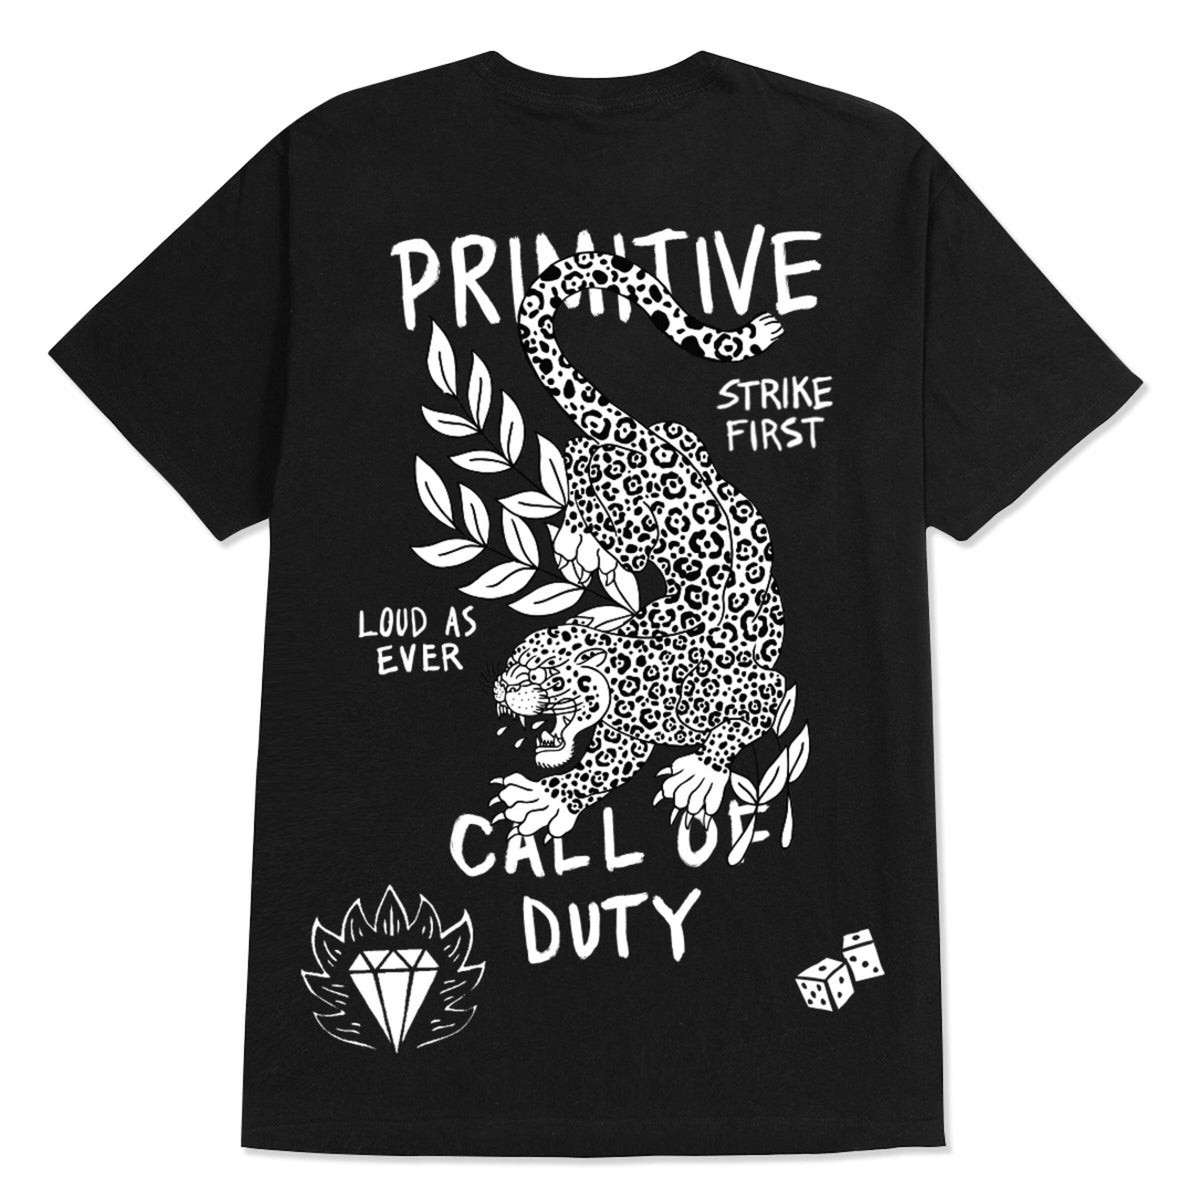 Primitive x Call of Duty Task Force Tee